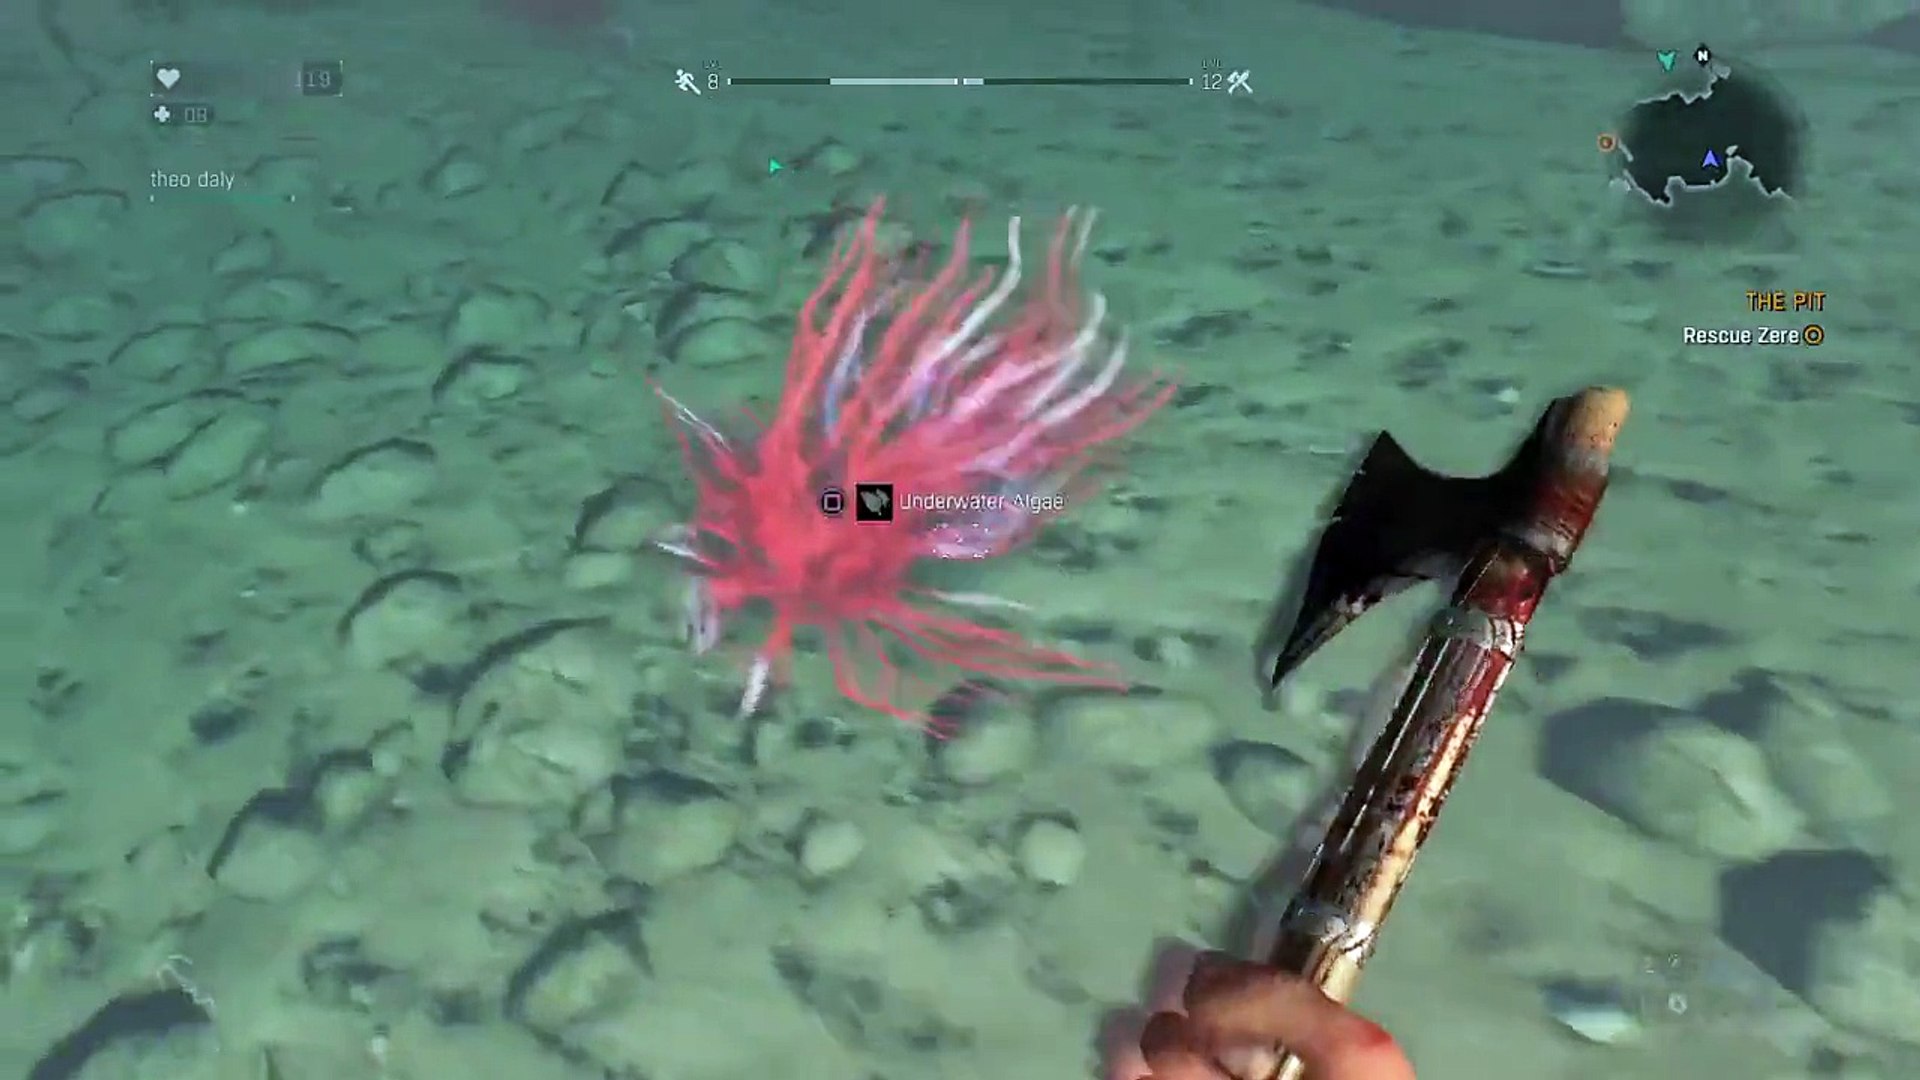 Dying Light where to find underwater algae - video Dailymotion